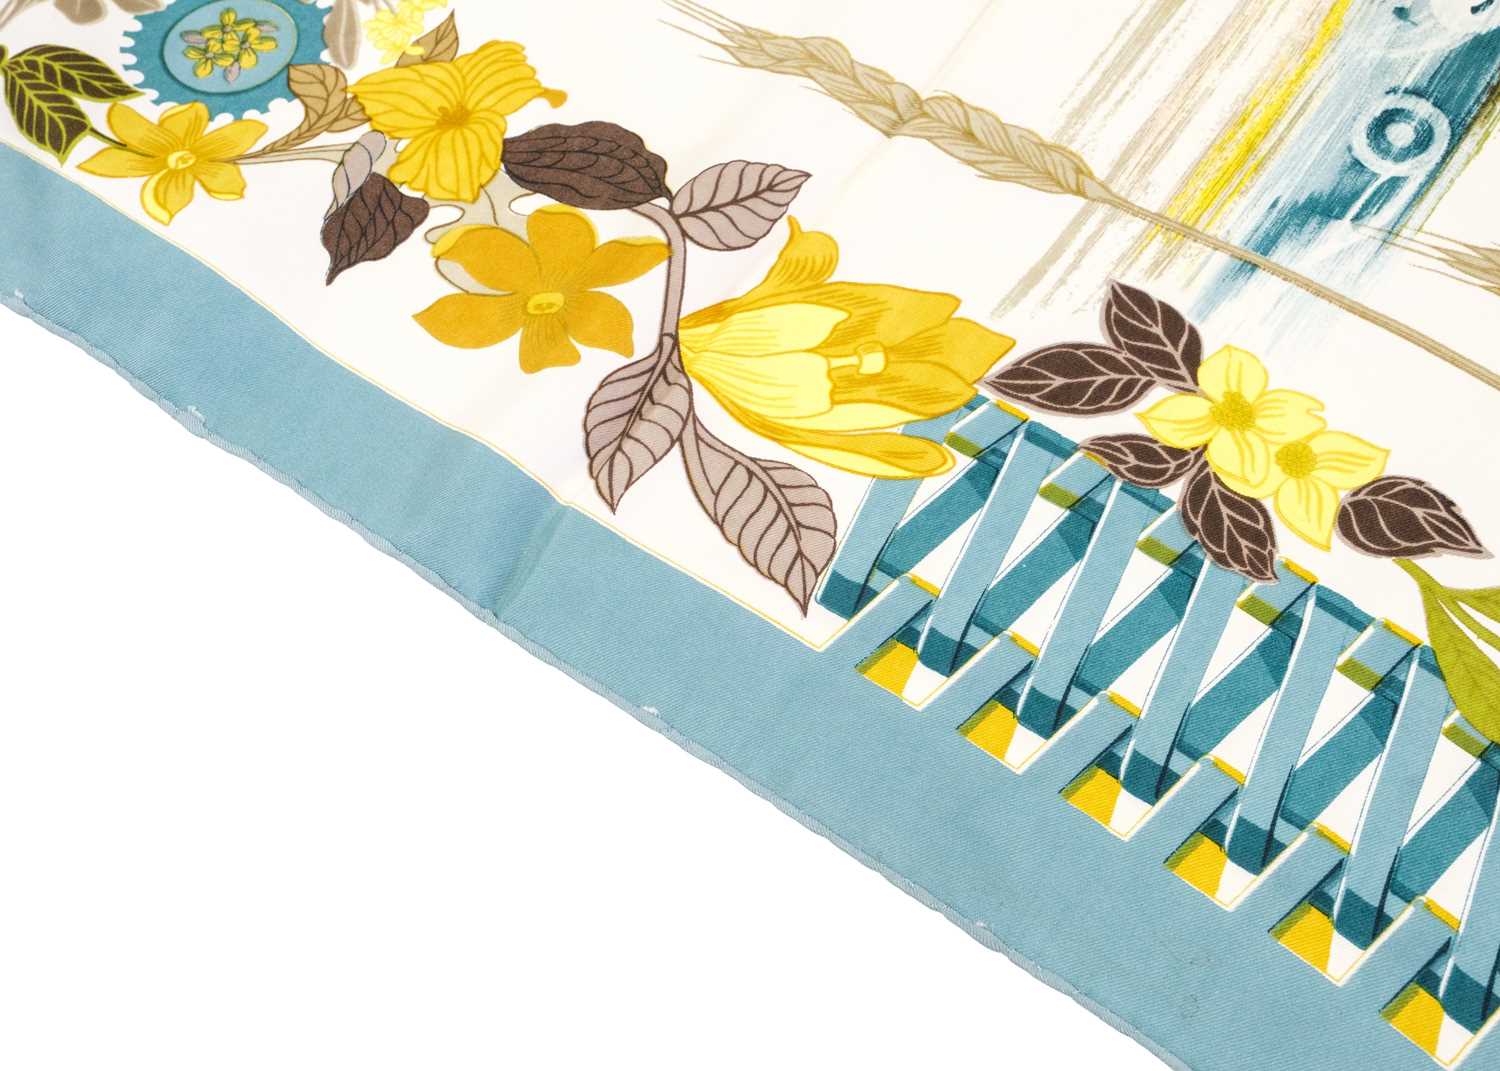 HERMES - A printed silk scarf 'Les Bolides'. - Image 3 of 7